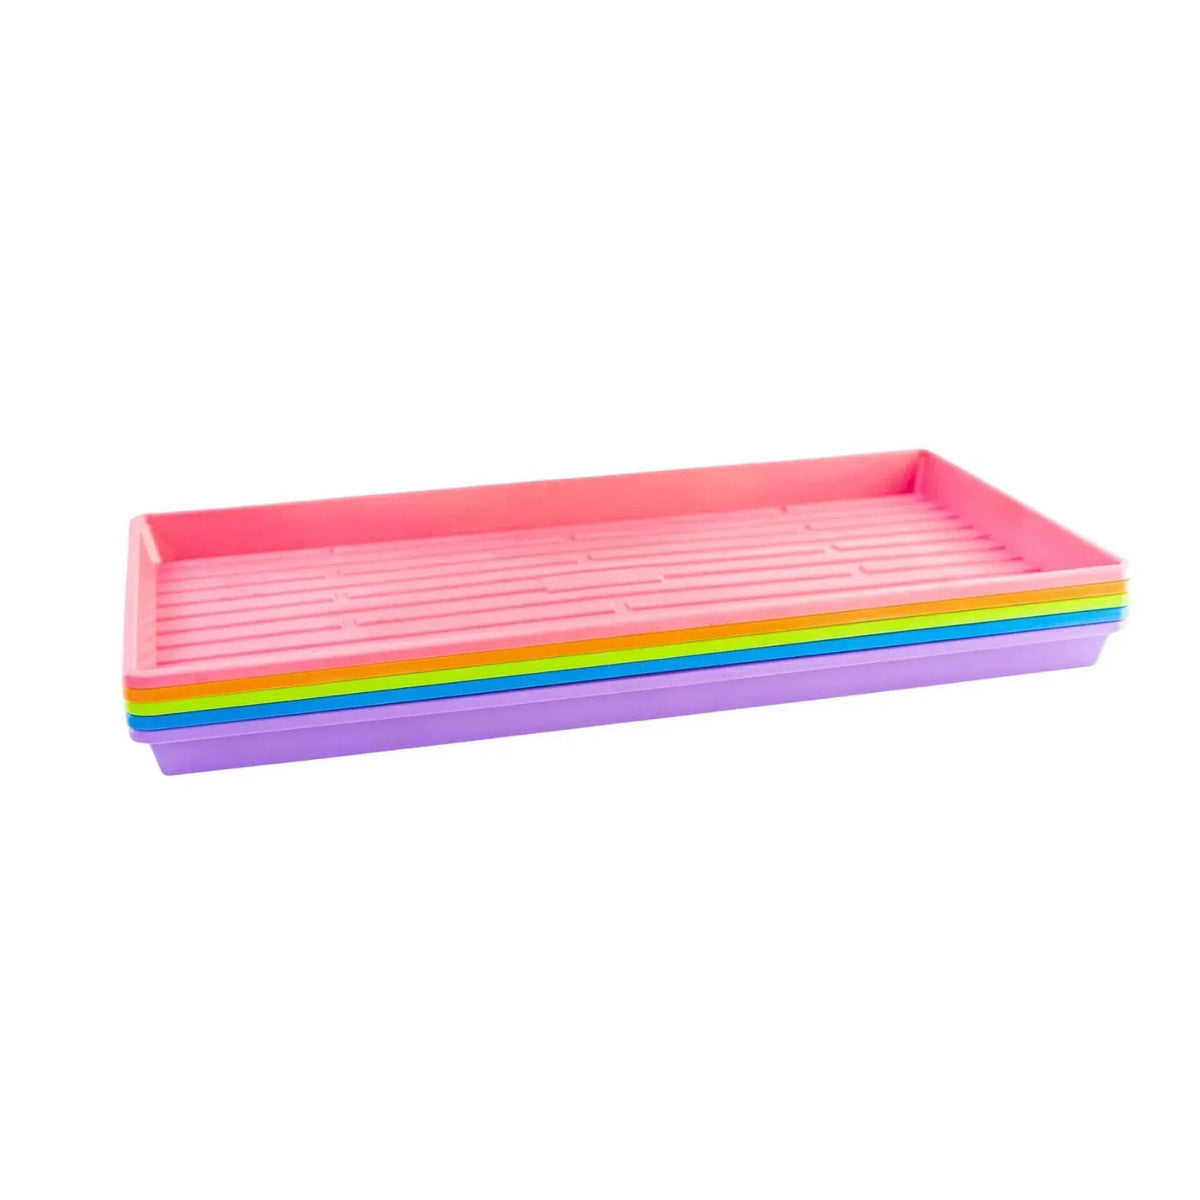 Bootstrap Farmer 1020 Shallow Extra Strength Microgreen Trays | Assorted Colors